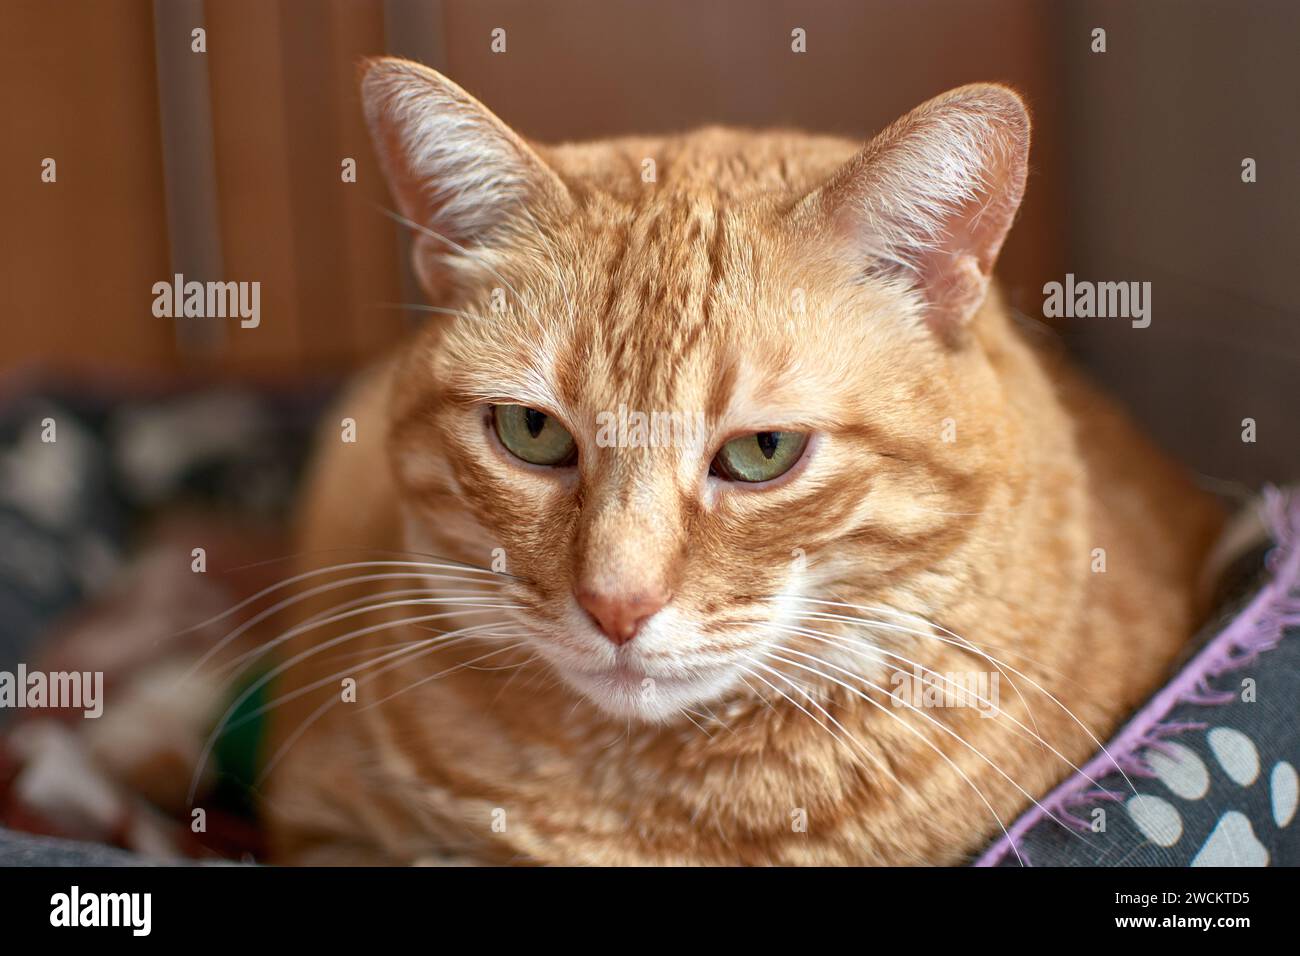 The head of a brown cat with very expressive eyes Stock Photo